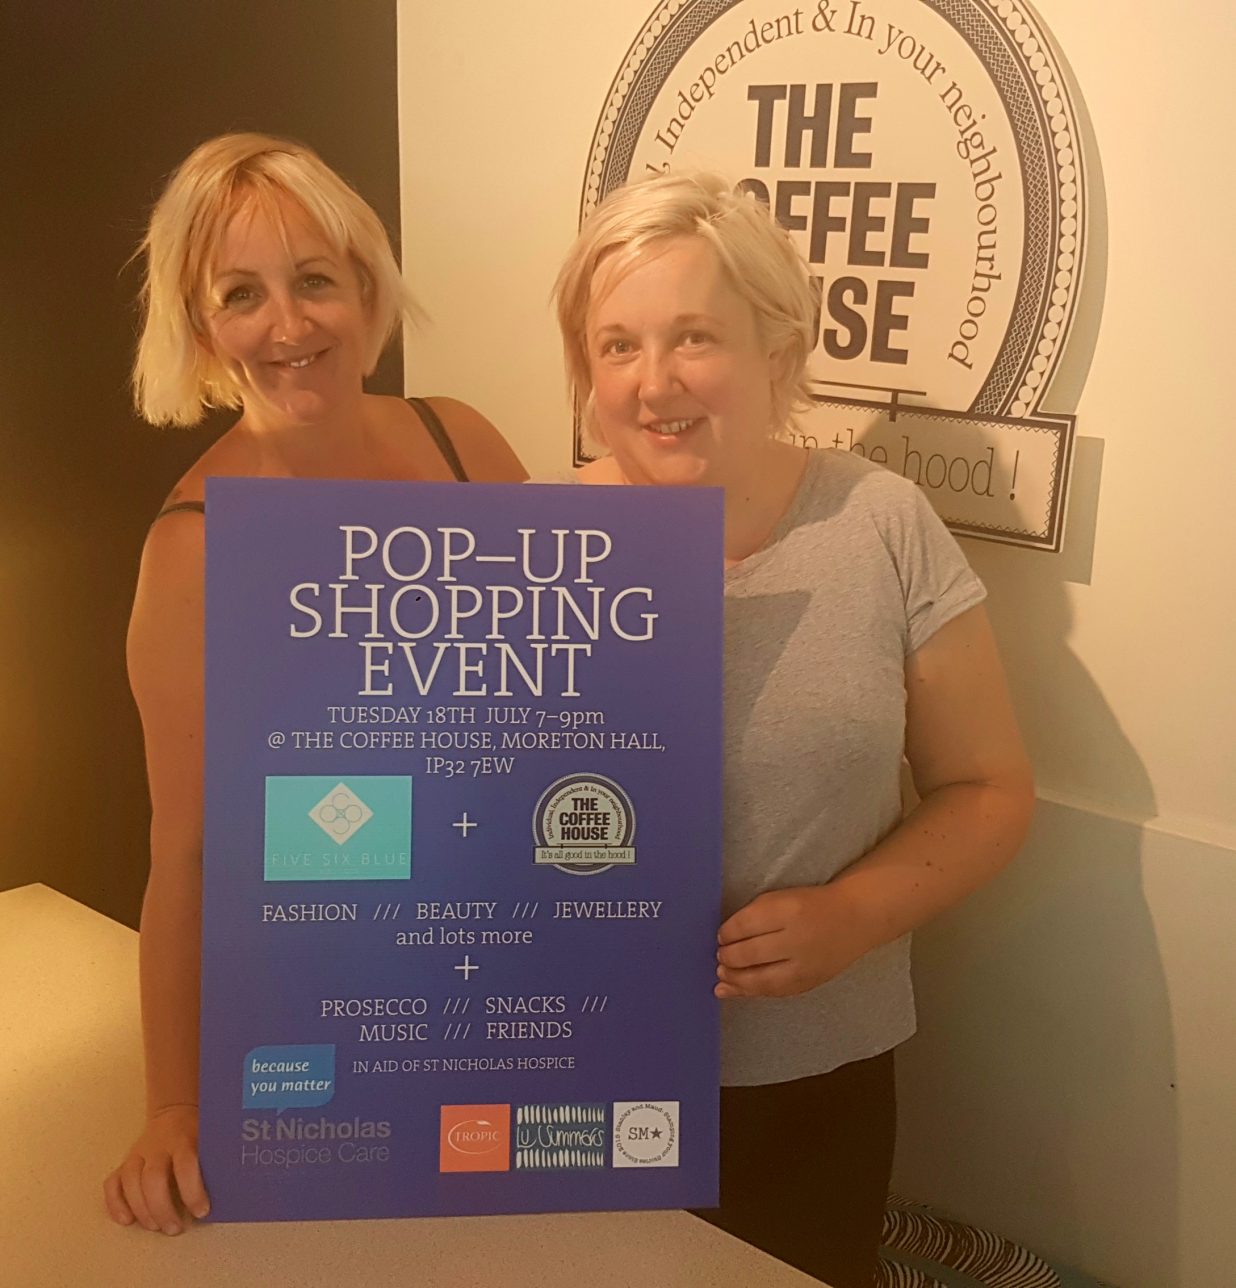 Pop-up shopping event will raise funds